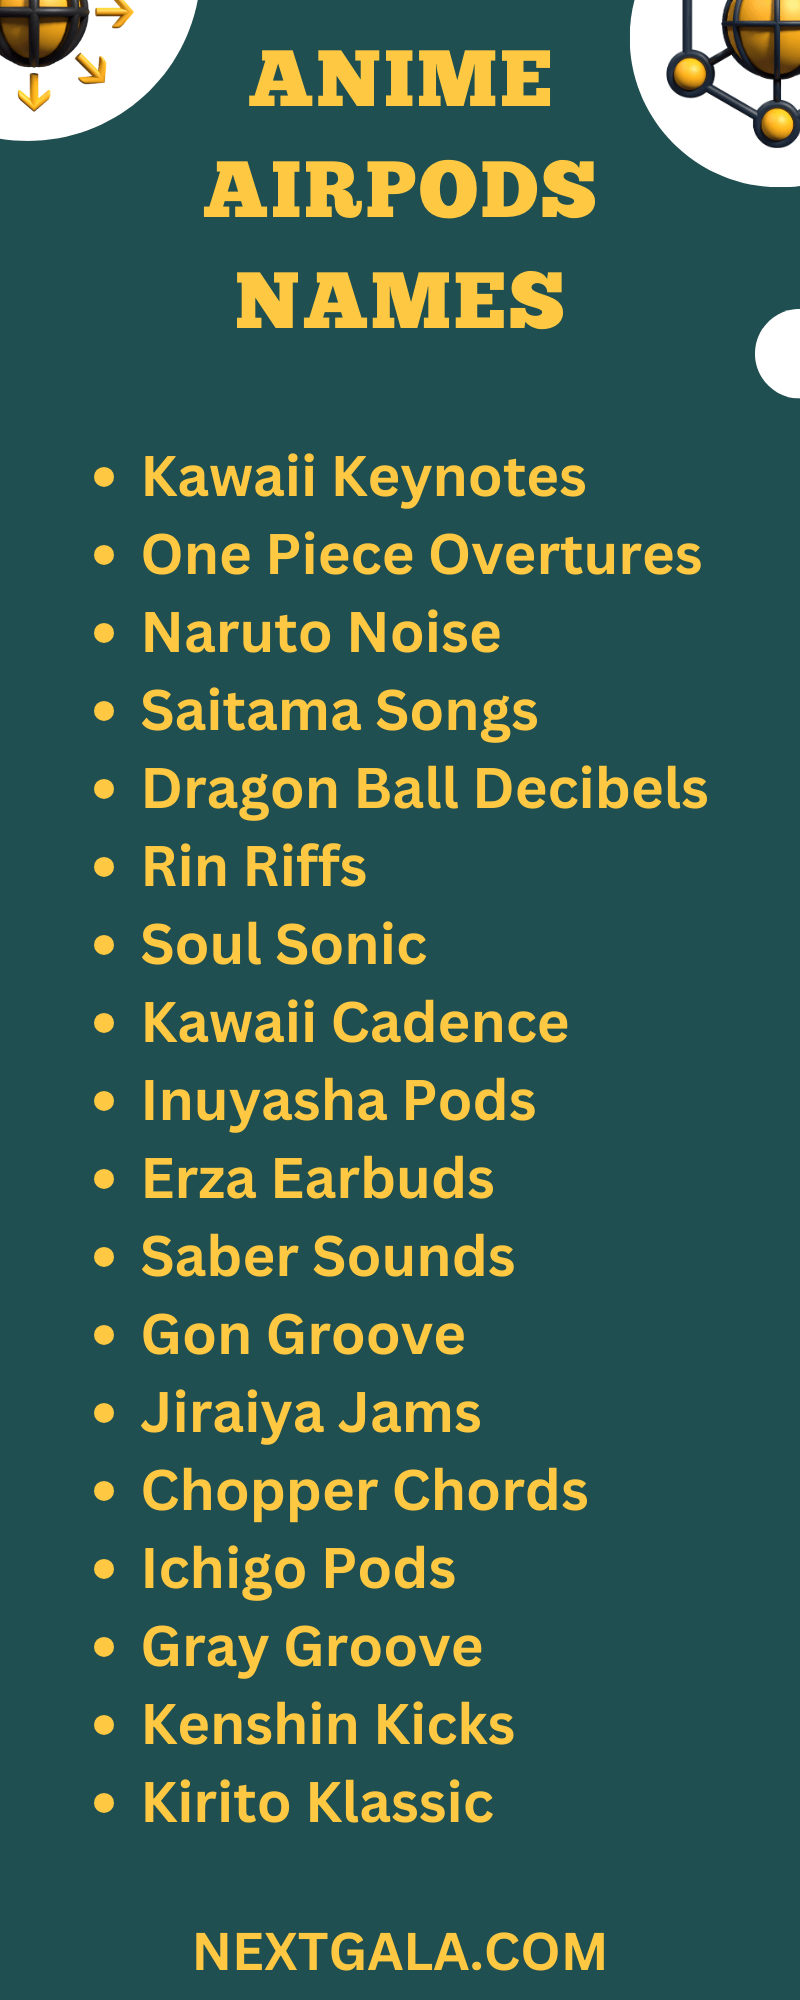 Anime Airpods Names